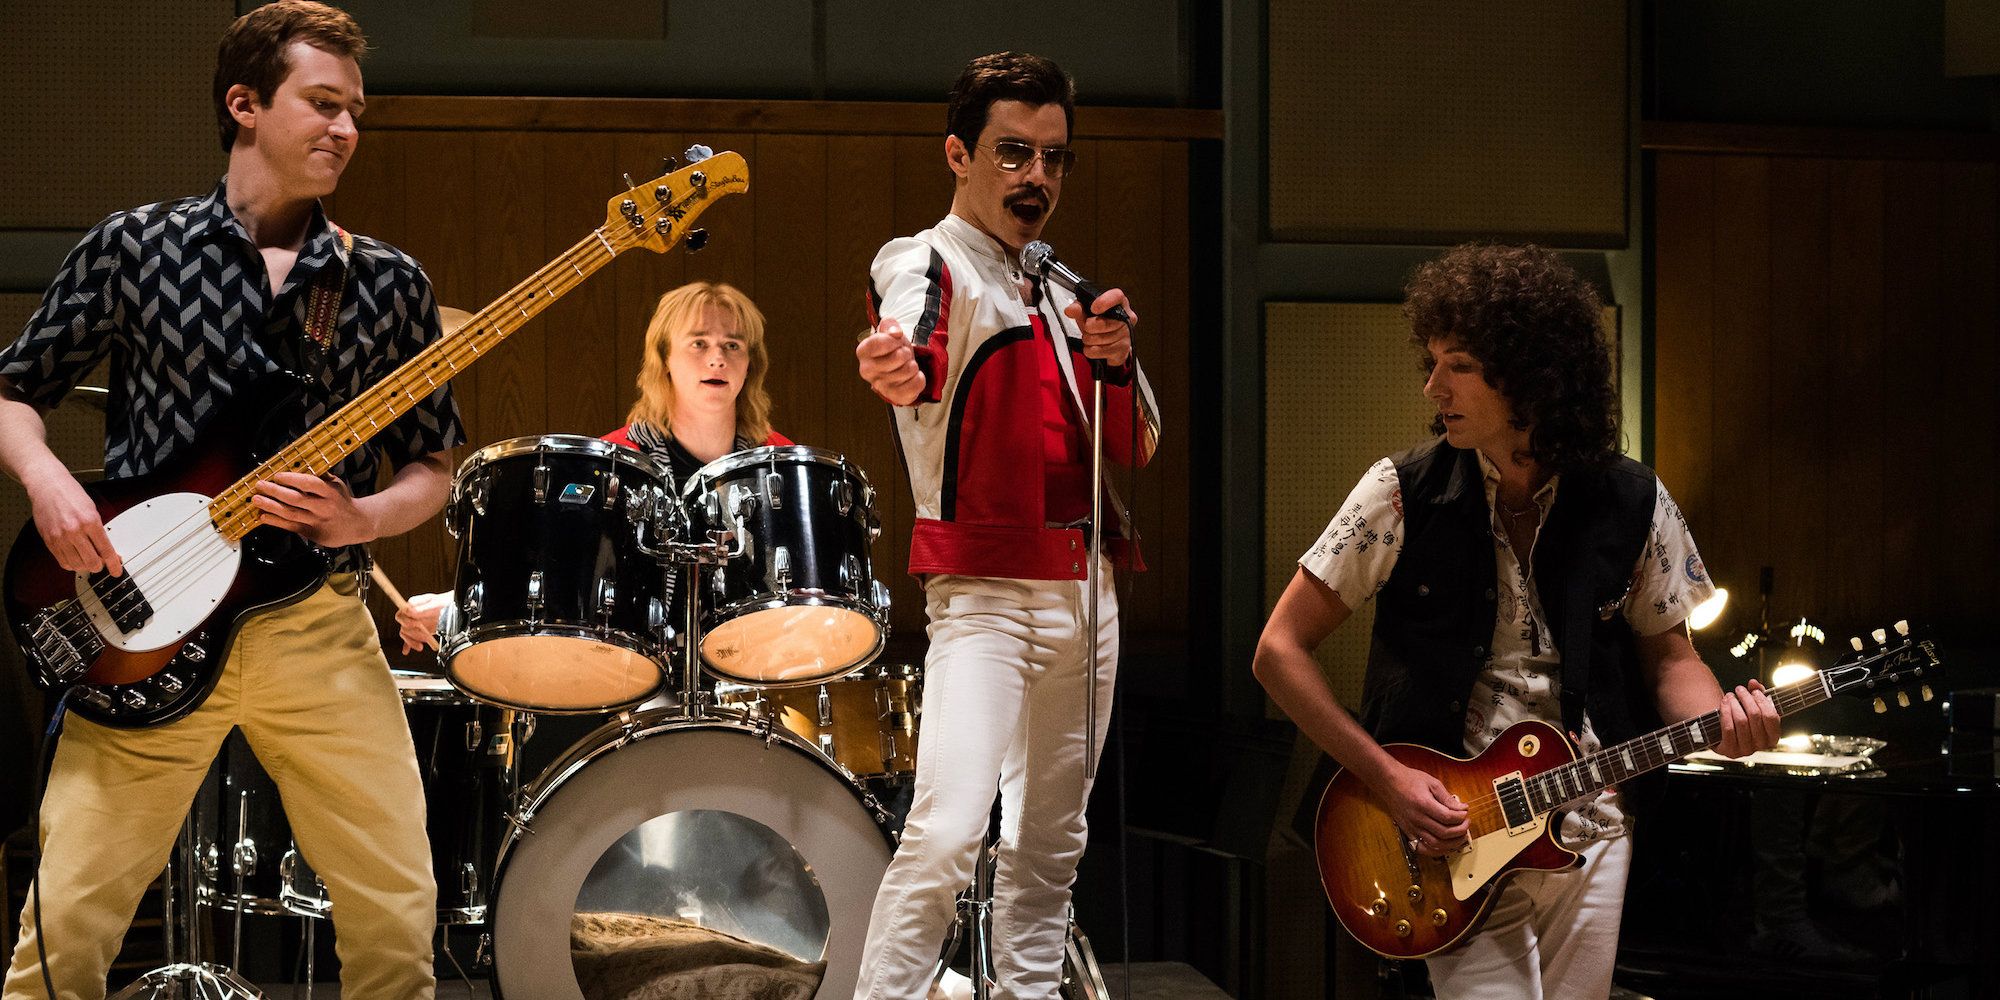 Bohemian Rhapsody Review: This Musical Biopic is No Killer Queen